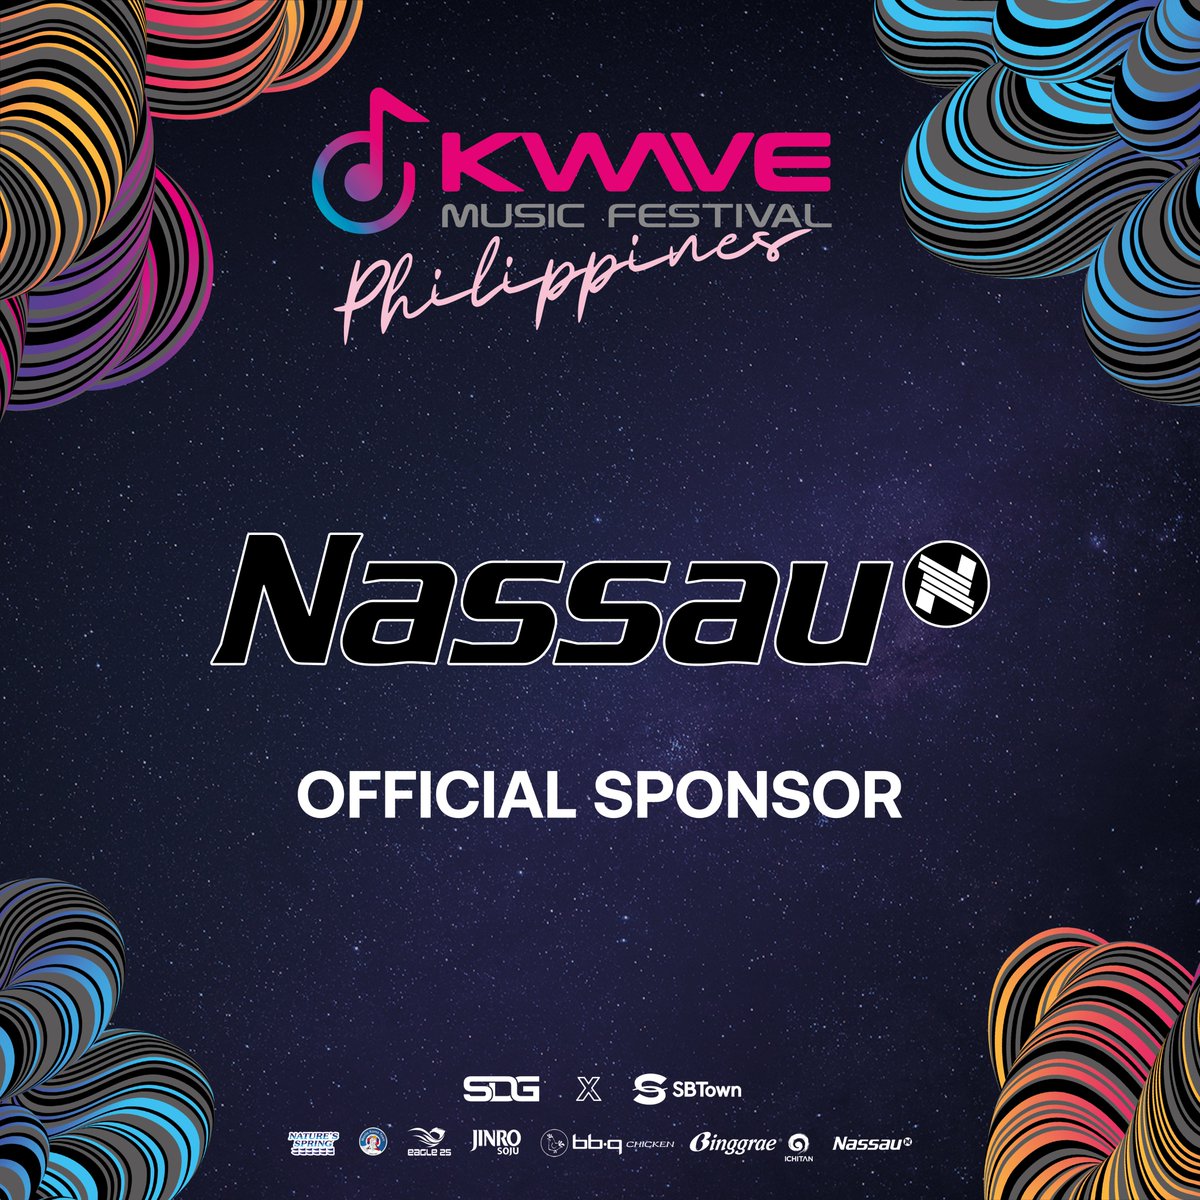 Here in KWAVE, we say yes to fitness! 🏃

KWAVERS! Prepare yourself for an exciting ride by maintaining your fitness and well-being with Nassau Sports on May 11! 🌊💪

#THEBOYZ #fromis_9 #PLUUS #YGIG #YARA #KAIA #KWAVEPH #AbsolutelyLibre #KWAVEMusicFestival #BadmintonAsia #KWAVE